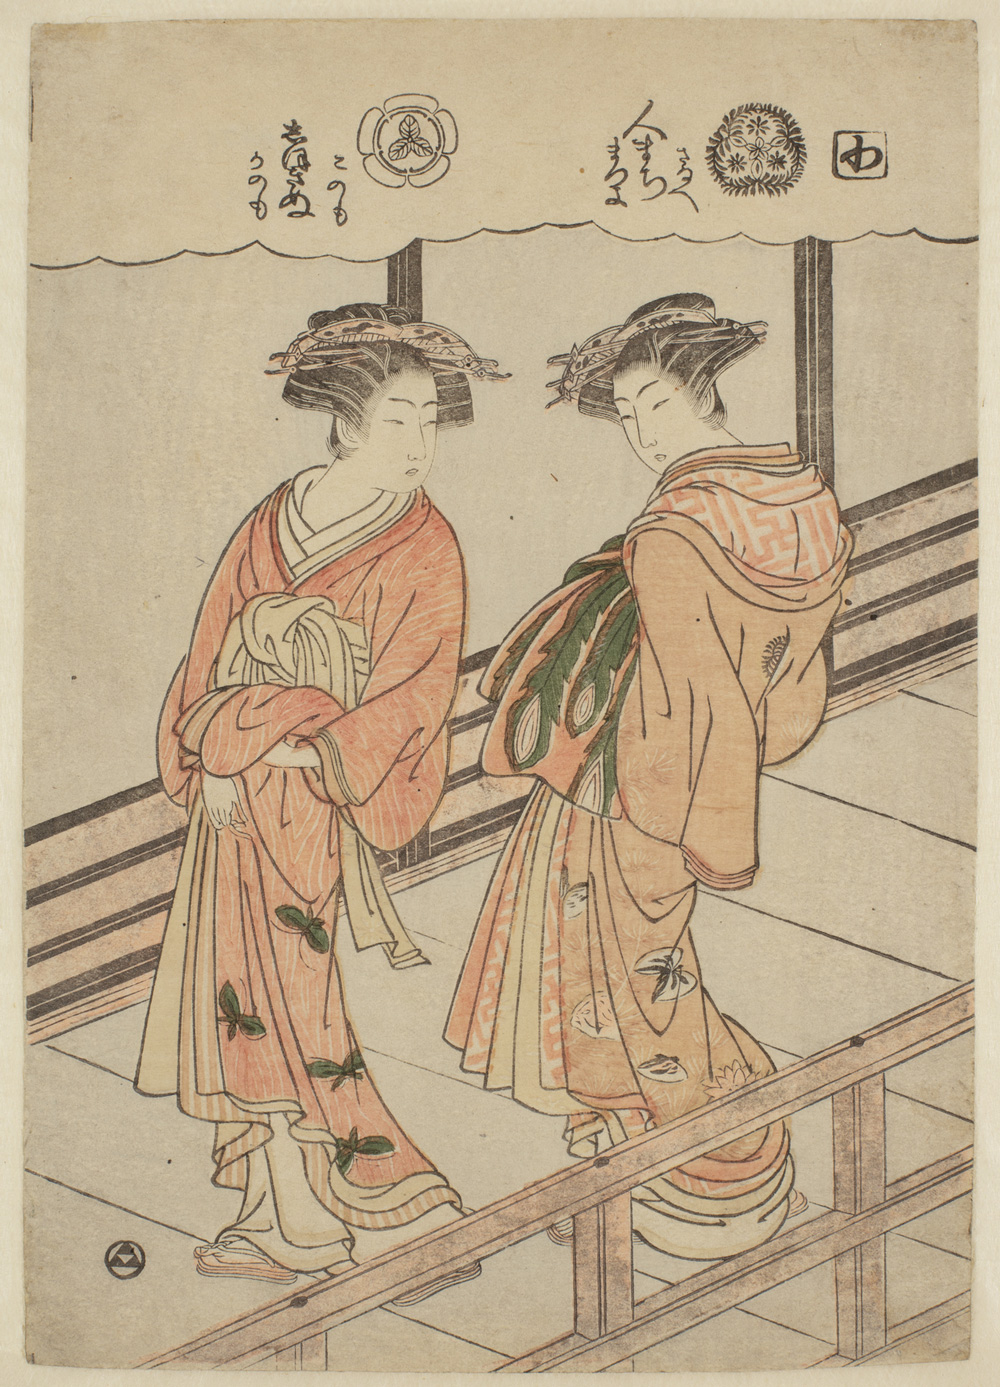 Japanese print of two women dressed in traditional robes, standing on a walkway.